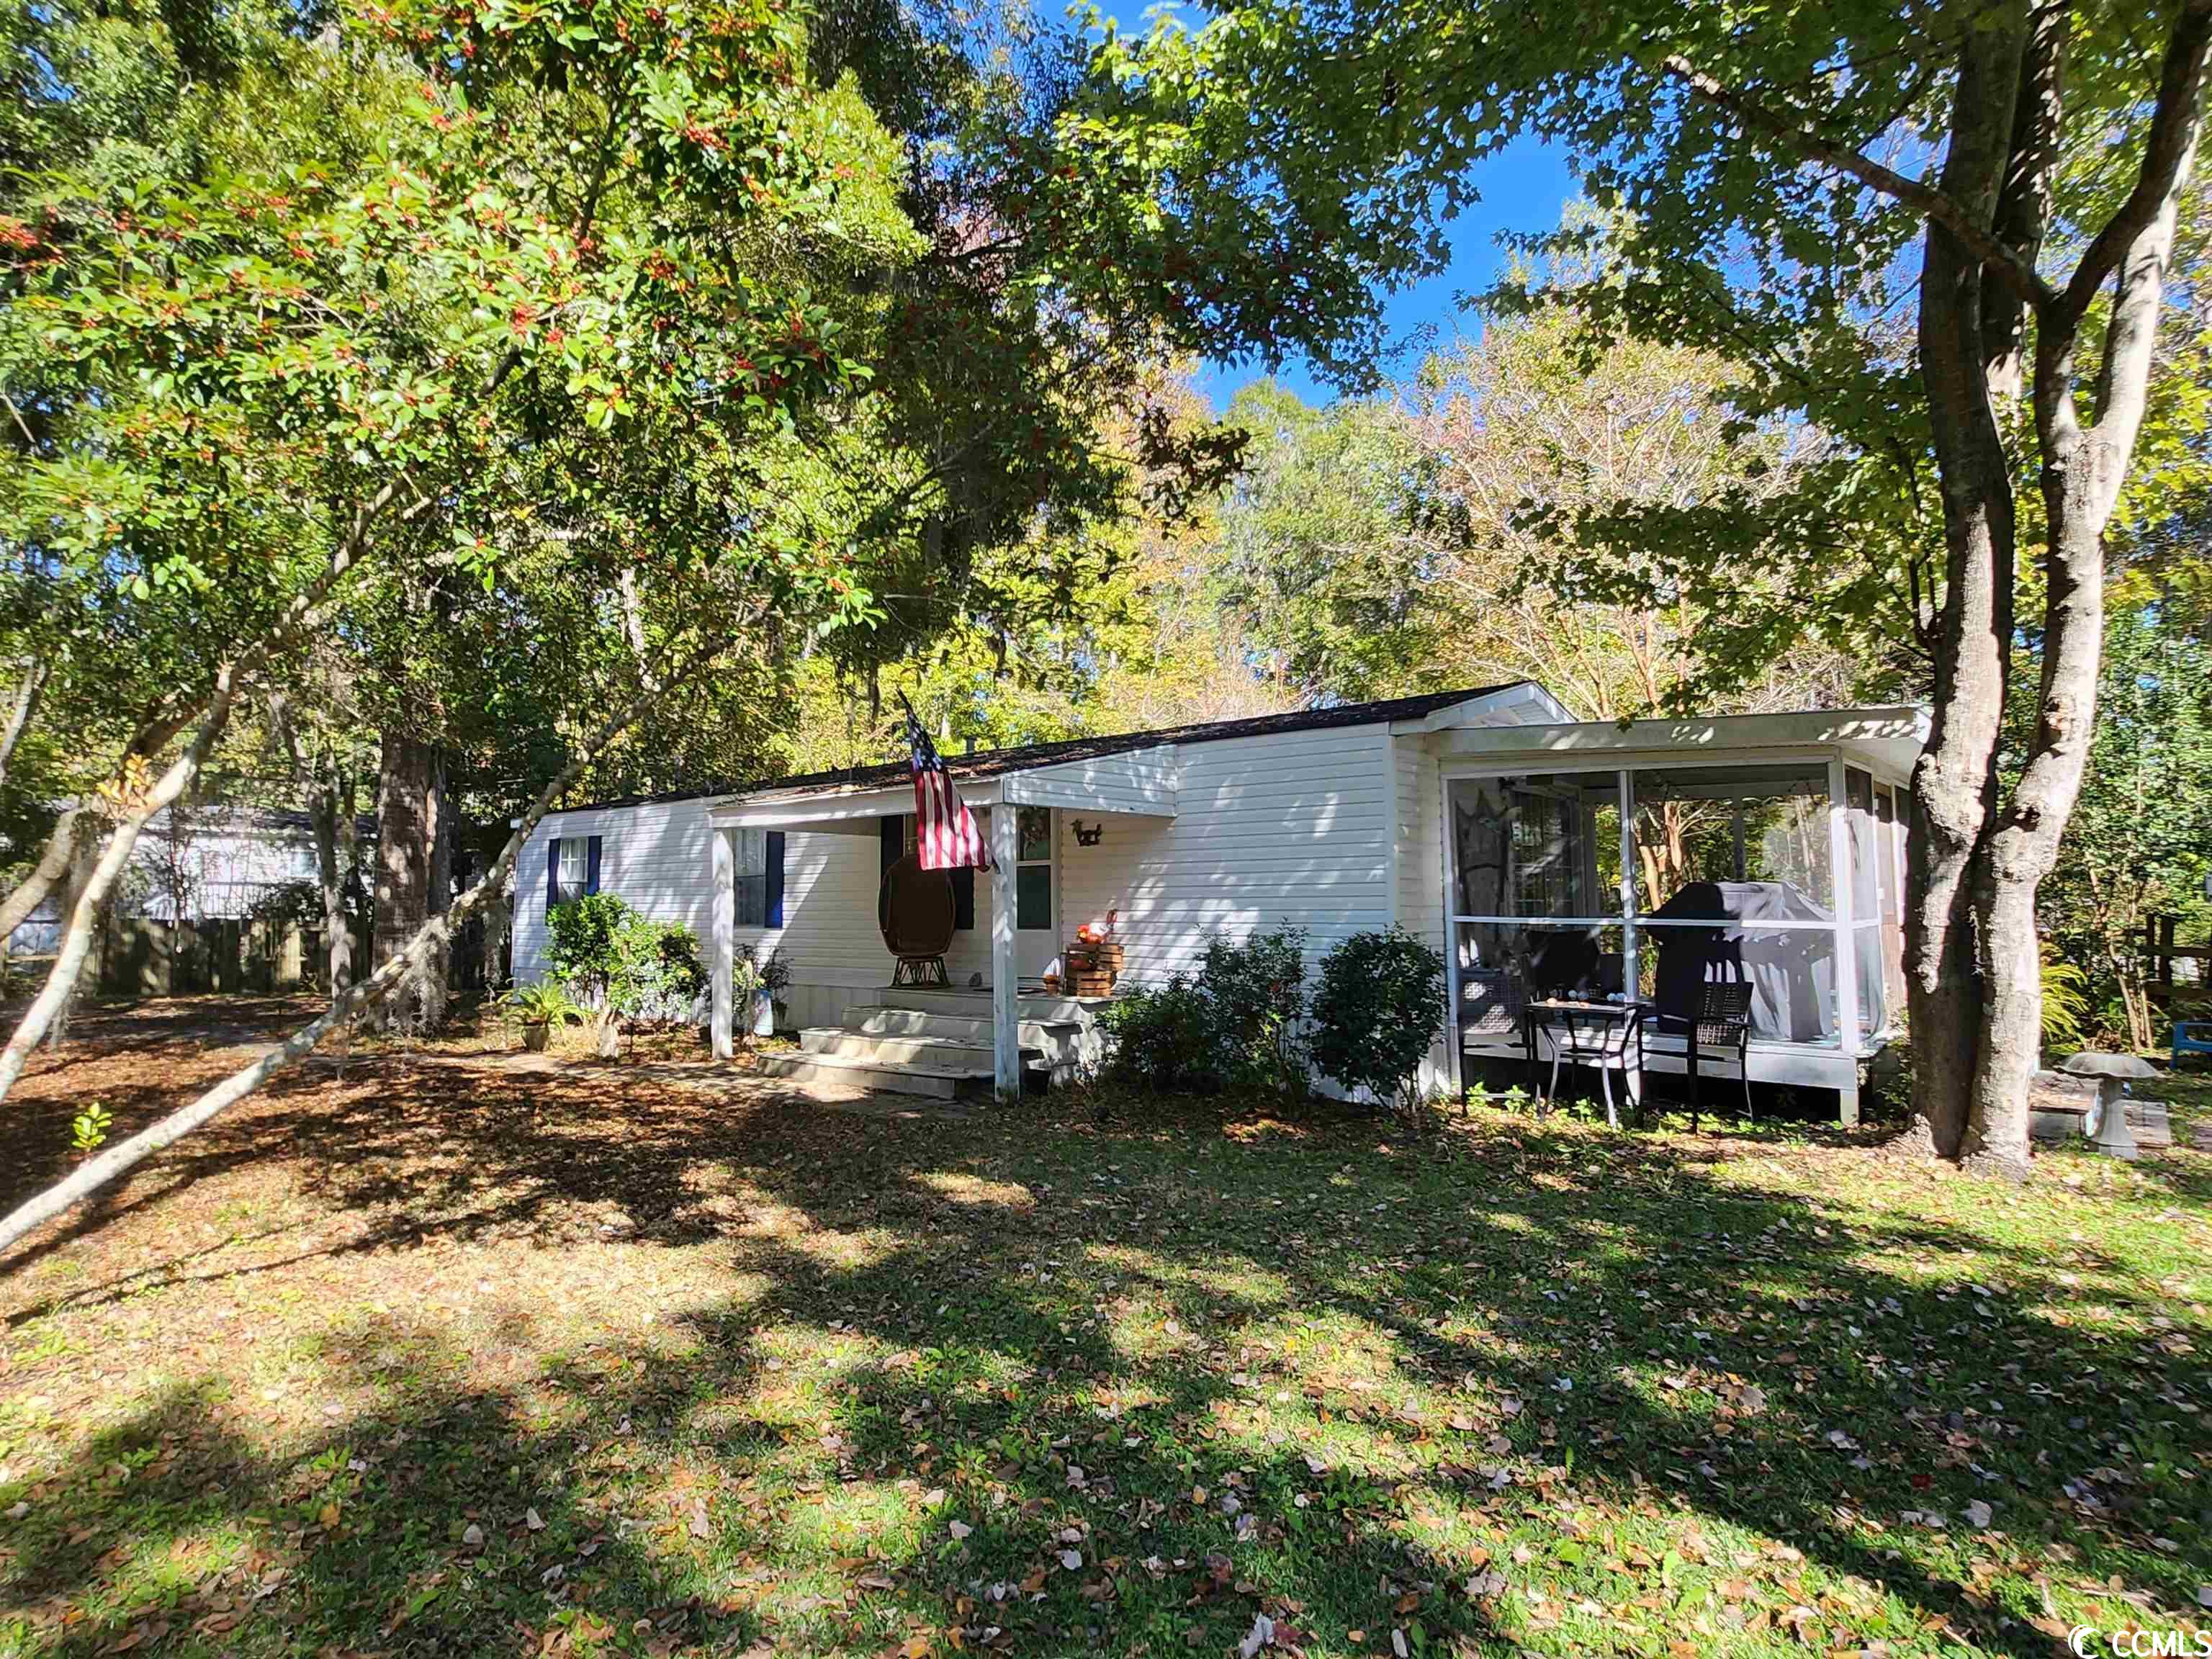 welcome home! centrally located in the heart of pawleys, this home is nestled in a quiet neighborhood on just under a half an acre with mature trees, including live oaks draped in spanish moss. relax with a book or enjoy coffee or cocktails on the 10x12 screened porch. remodeled, updated, and well-maintained, this home is move-in ready! everything included! close to churches, restaurants, shoppes/boutiques, numerous golf courses, and of course the beach!  (be sure to click on the virtual tour link to "walk through" the home.)